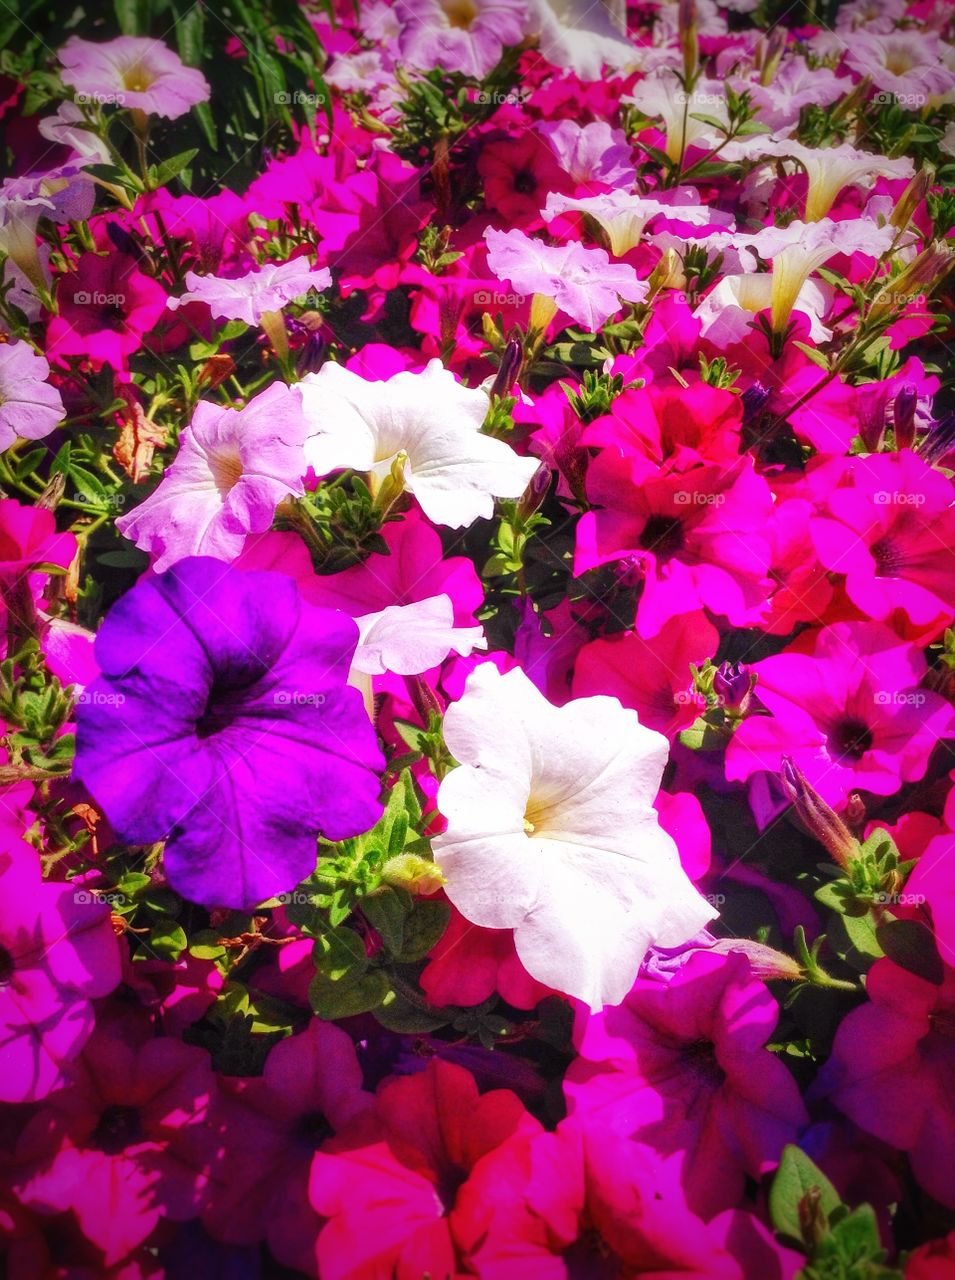 Petunias. Summer isn't complete without petunias in the garden.